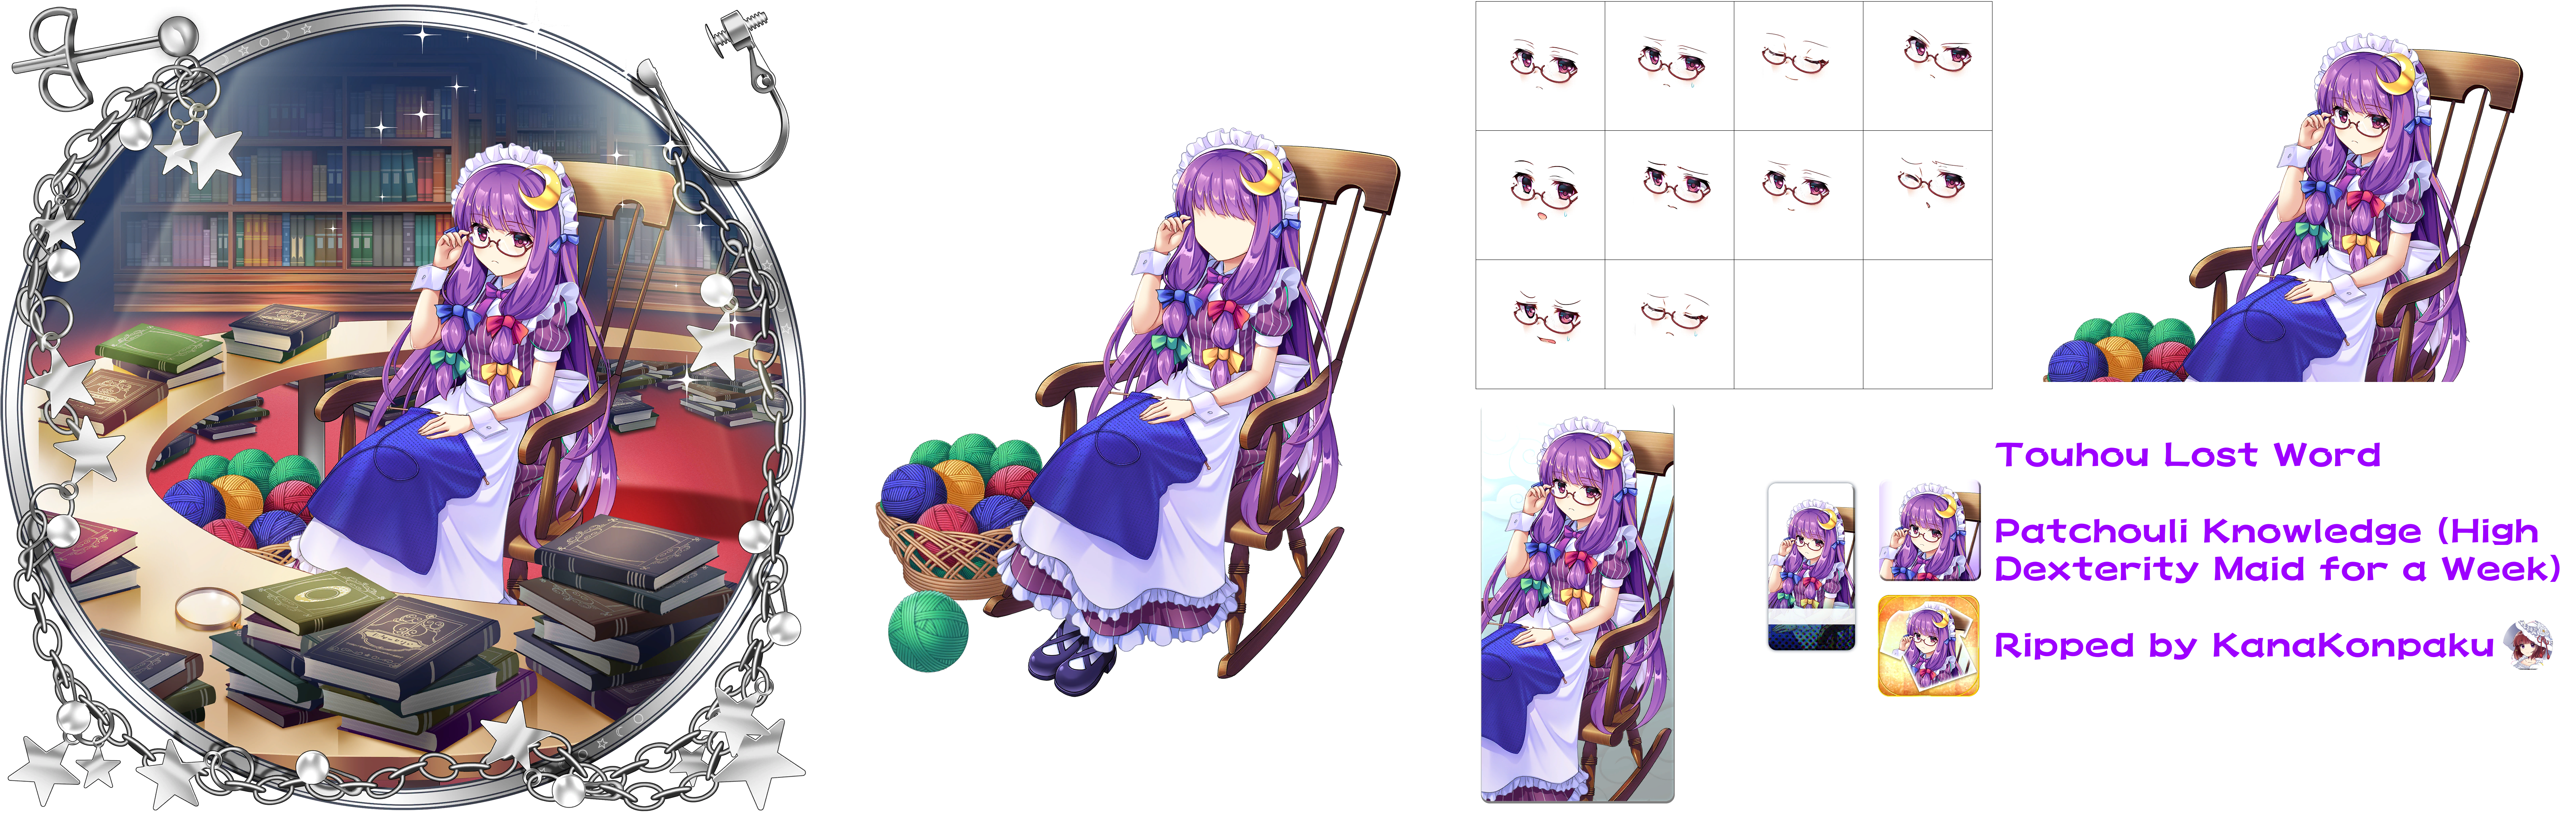 Patchouli Knowledge (High Dexterity Maid for a Week)